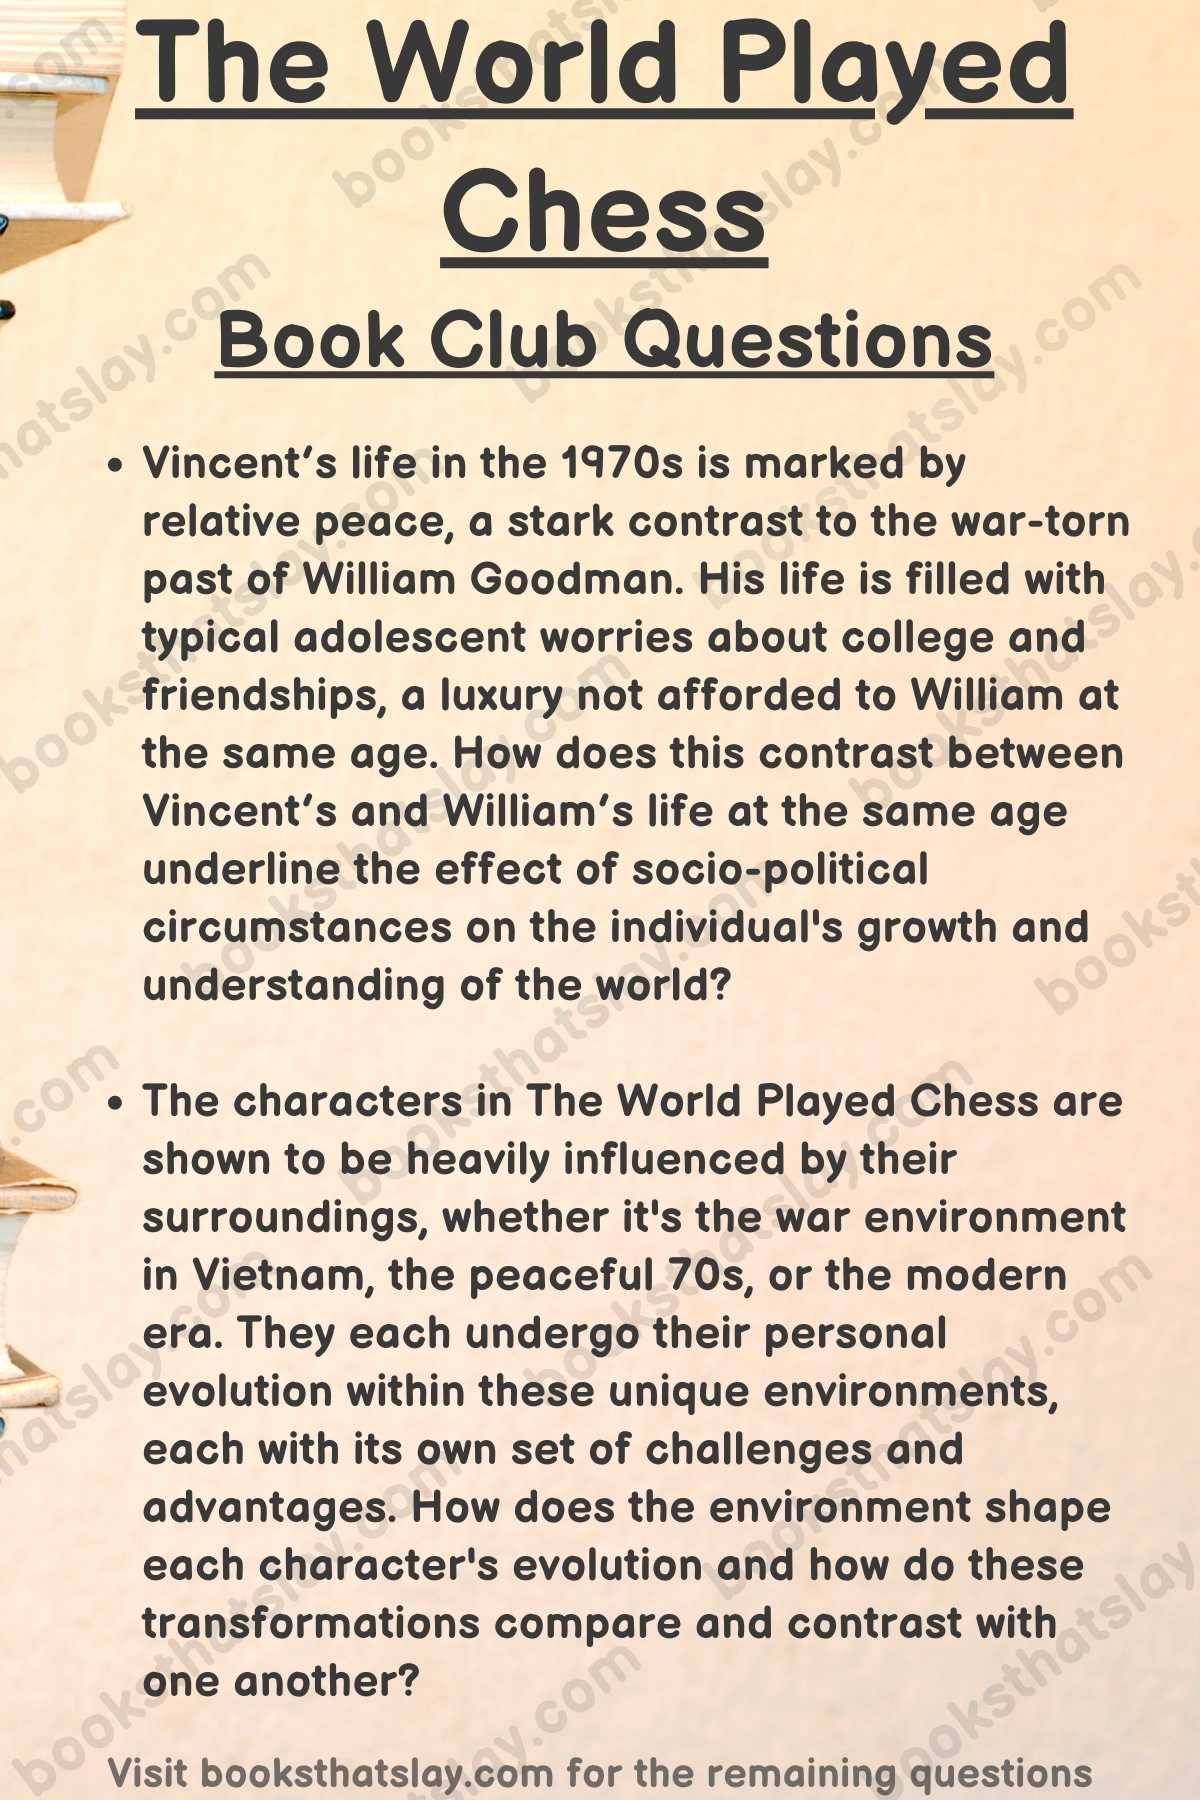 The World Played Chess Book Club Questions for Discussion